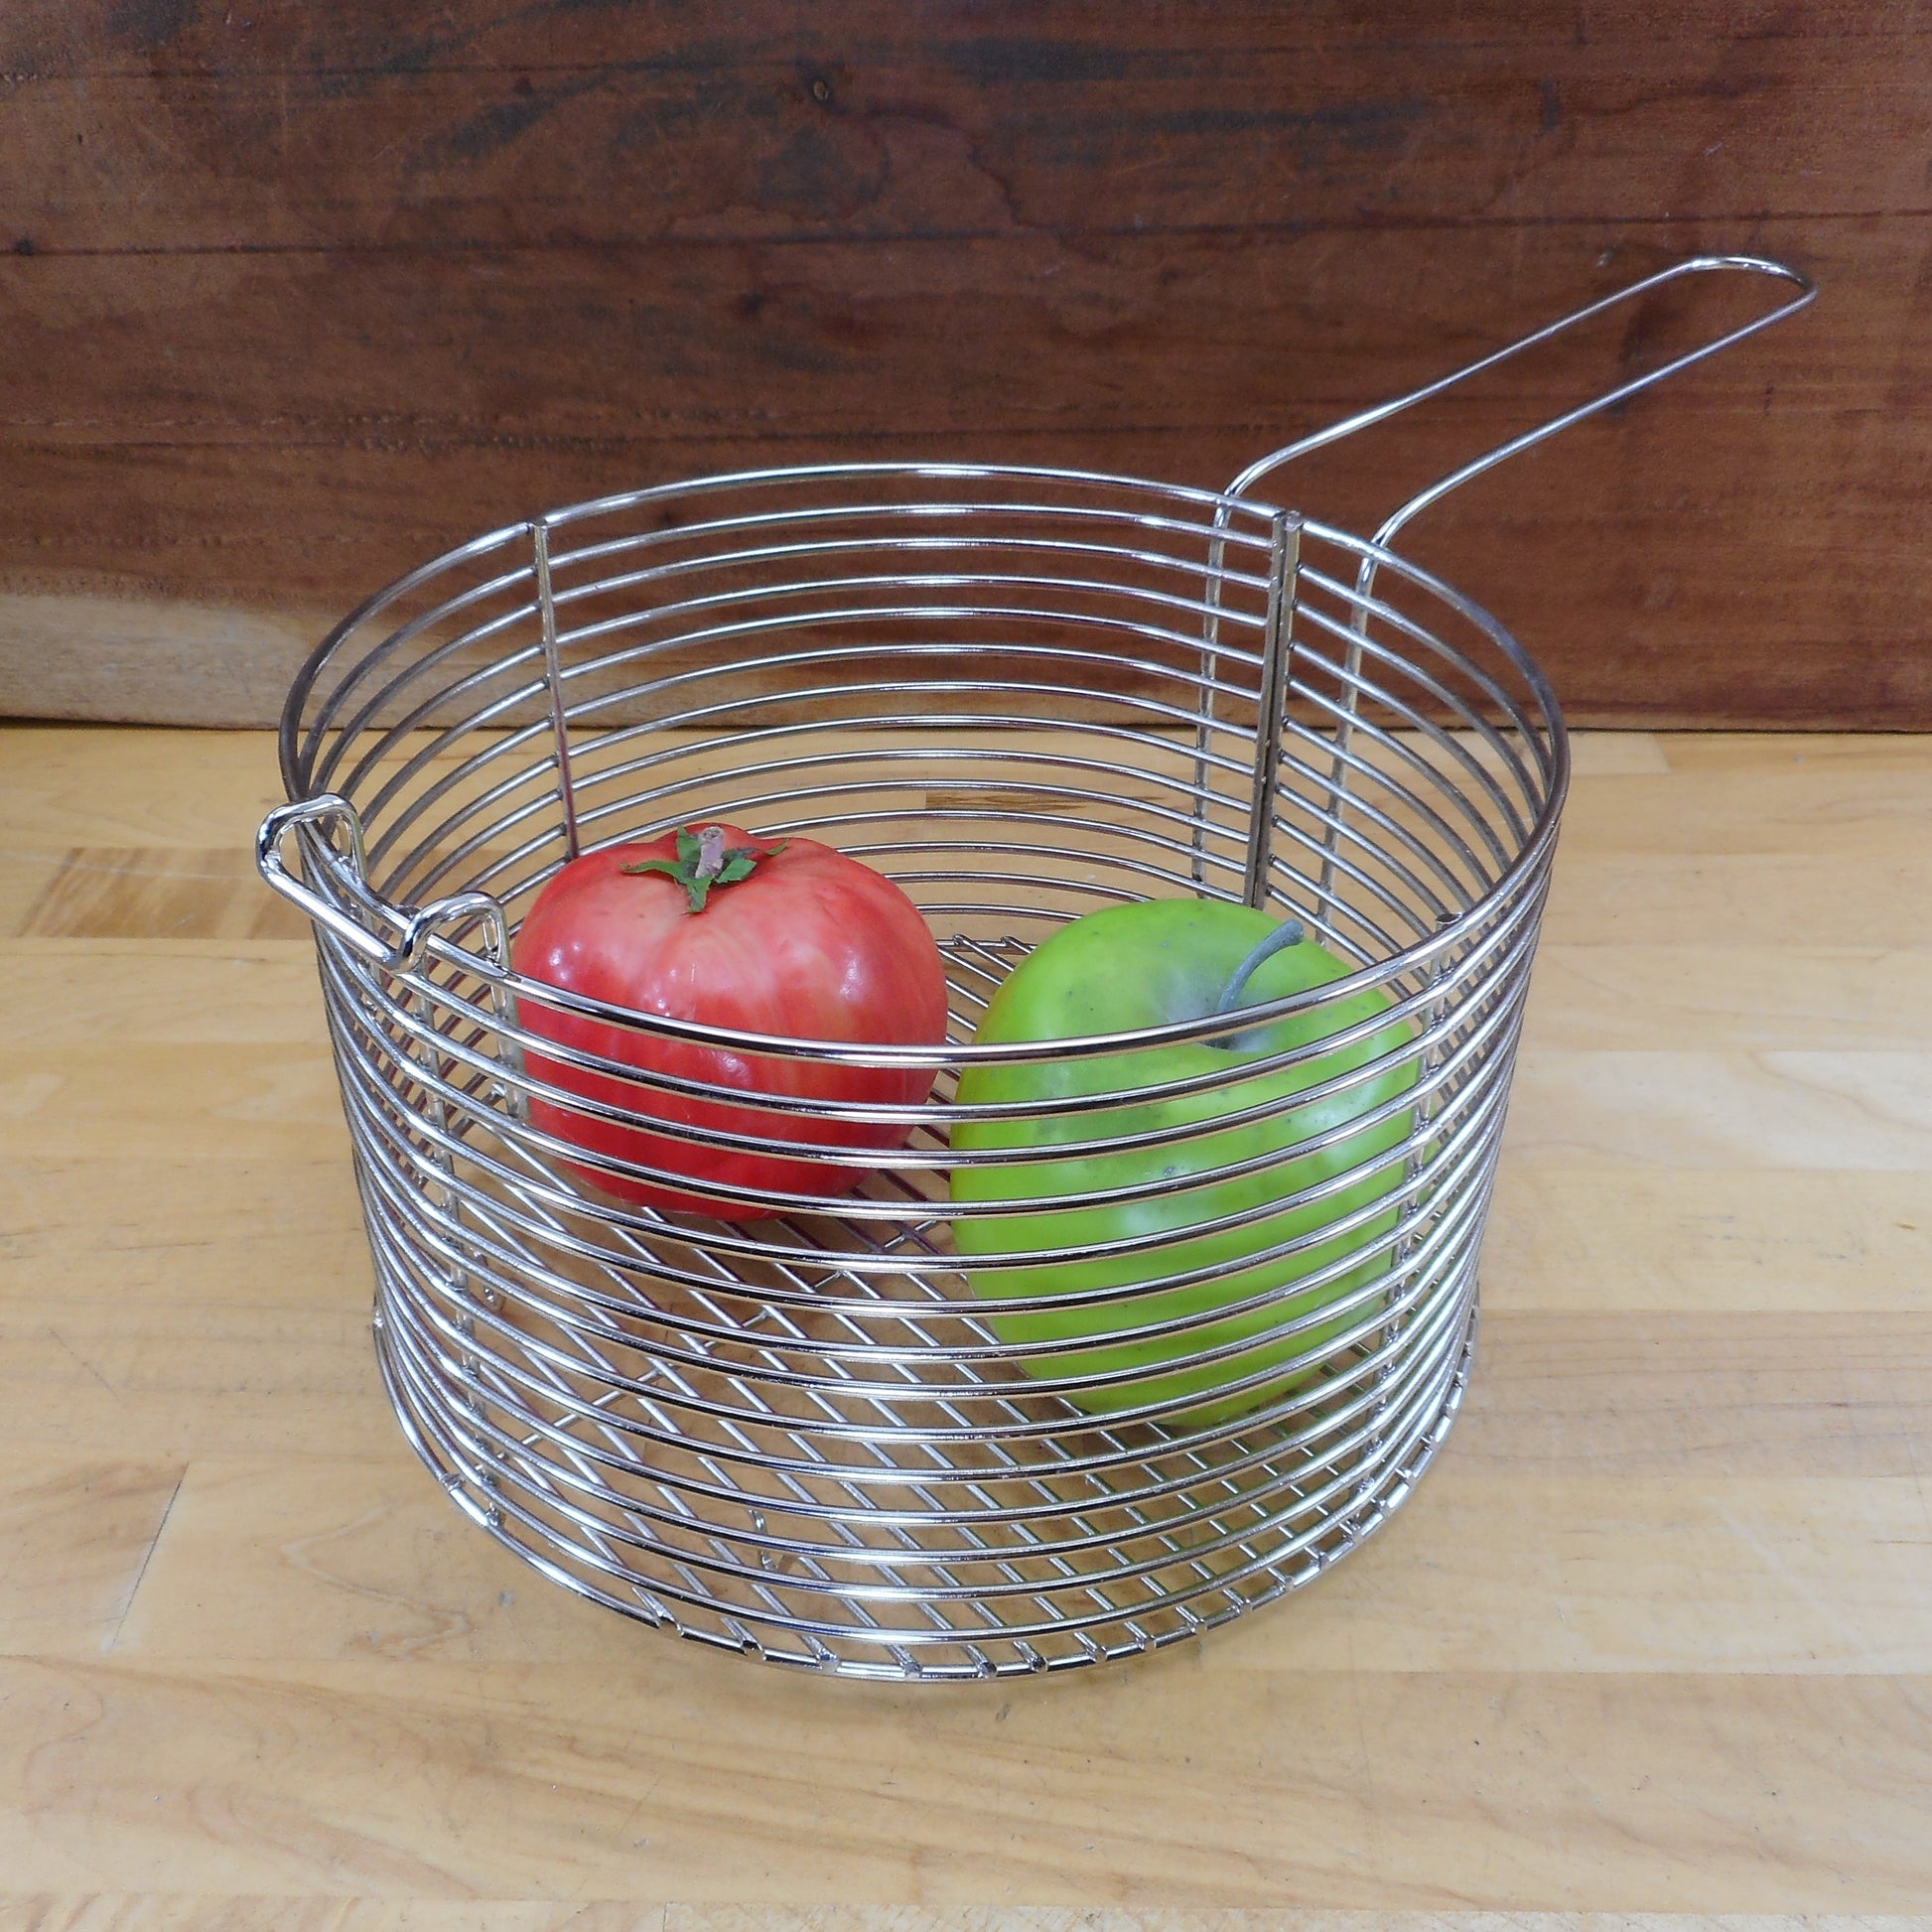 Fry Basket 4 Quart Stainless Steel 8" Round